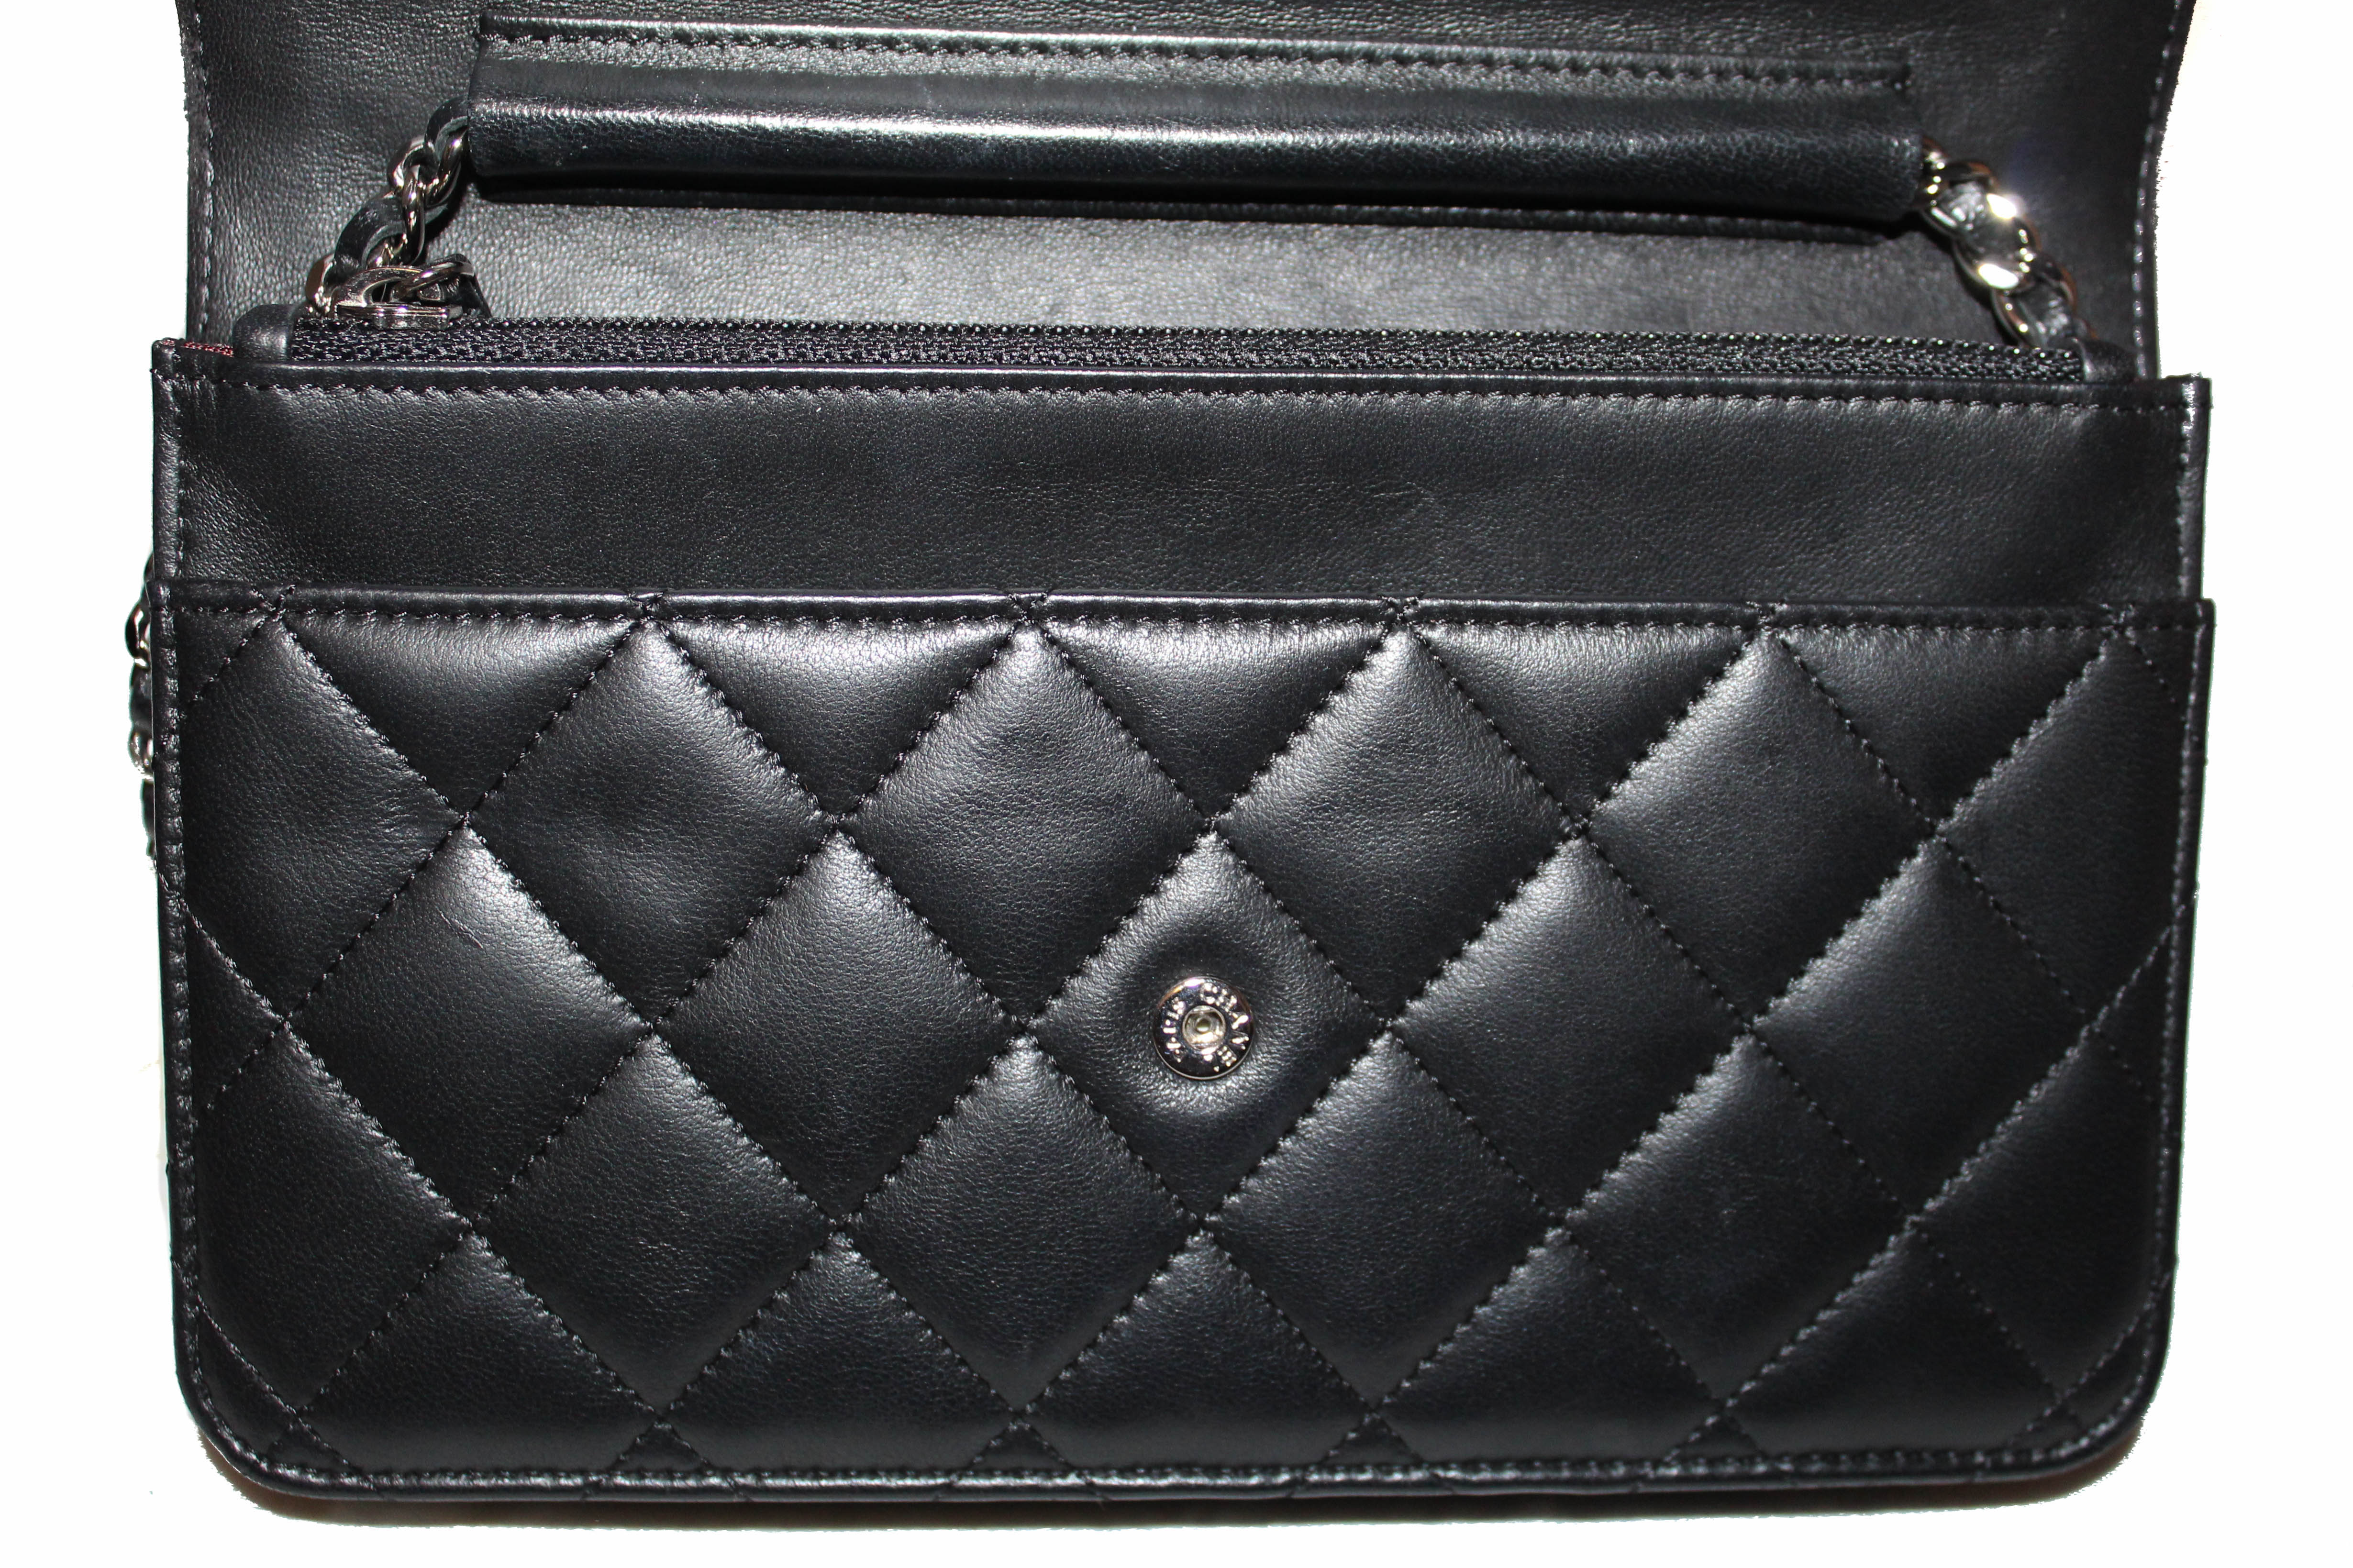 Authentic Chanel Black Quilted Lambskin Leather Wallet on Chain WOC Messenger Bag